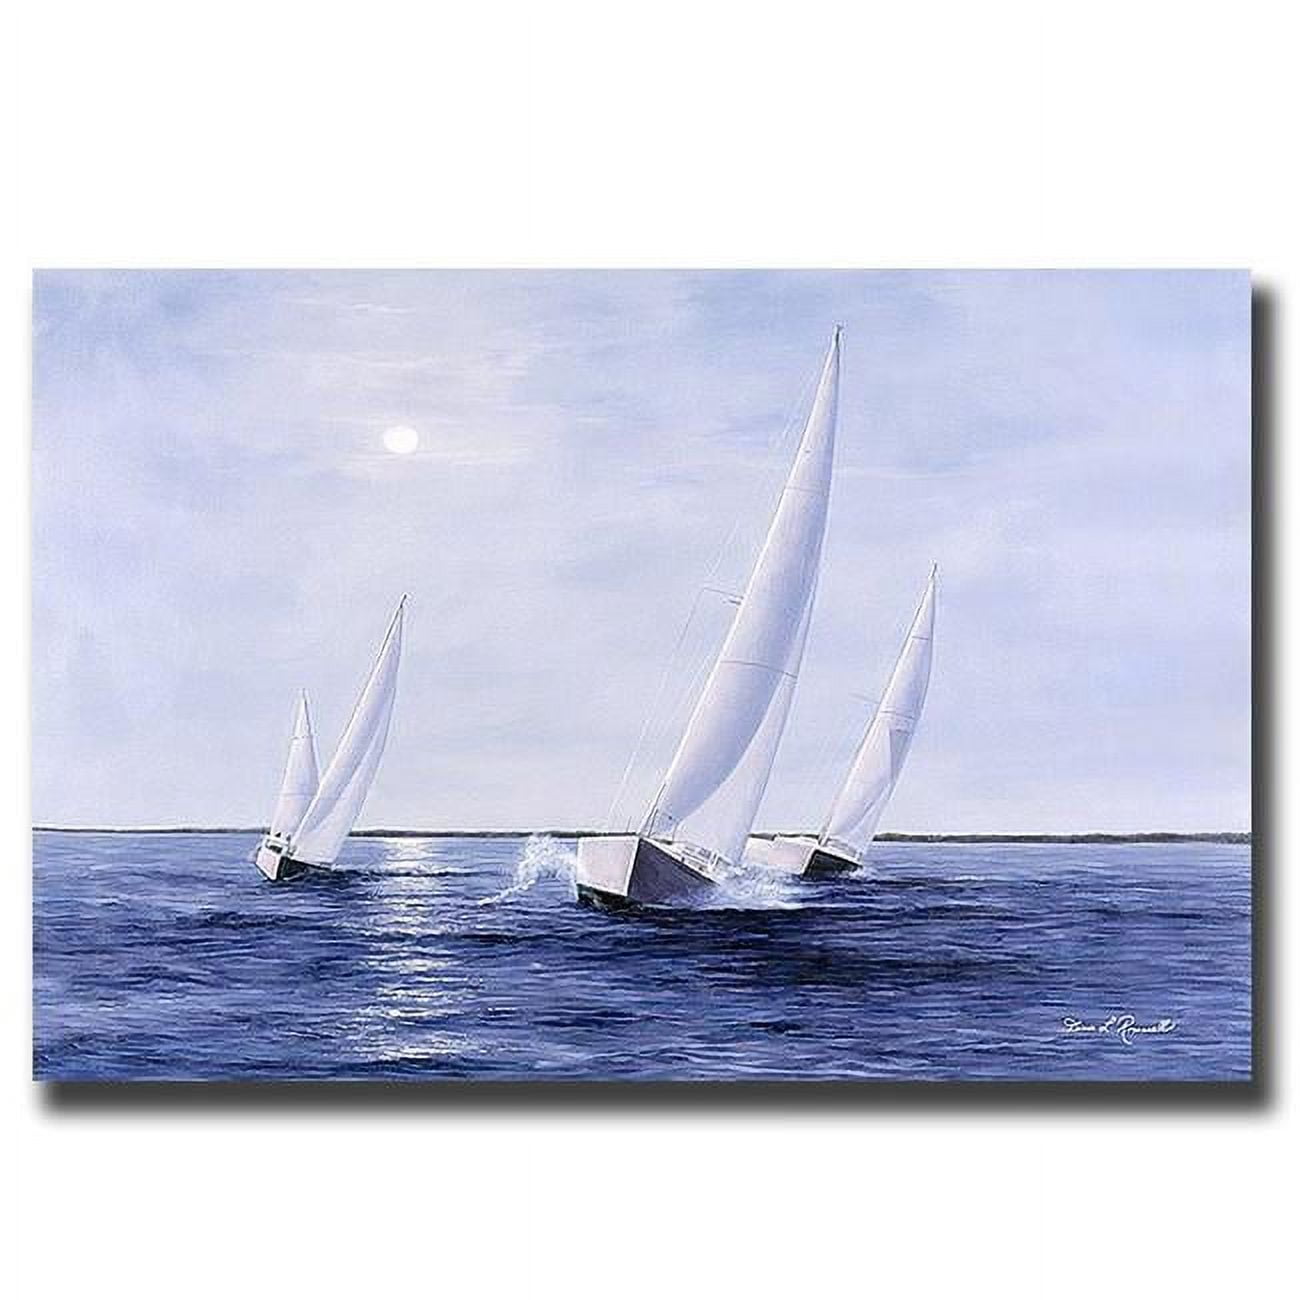 2436i734ig Blue Sails By Diane Romanello Premium Gallery-wrapped Canvas Giclee Art - Ready-to-hang, 24 X 36 X 1.5 In.